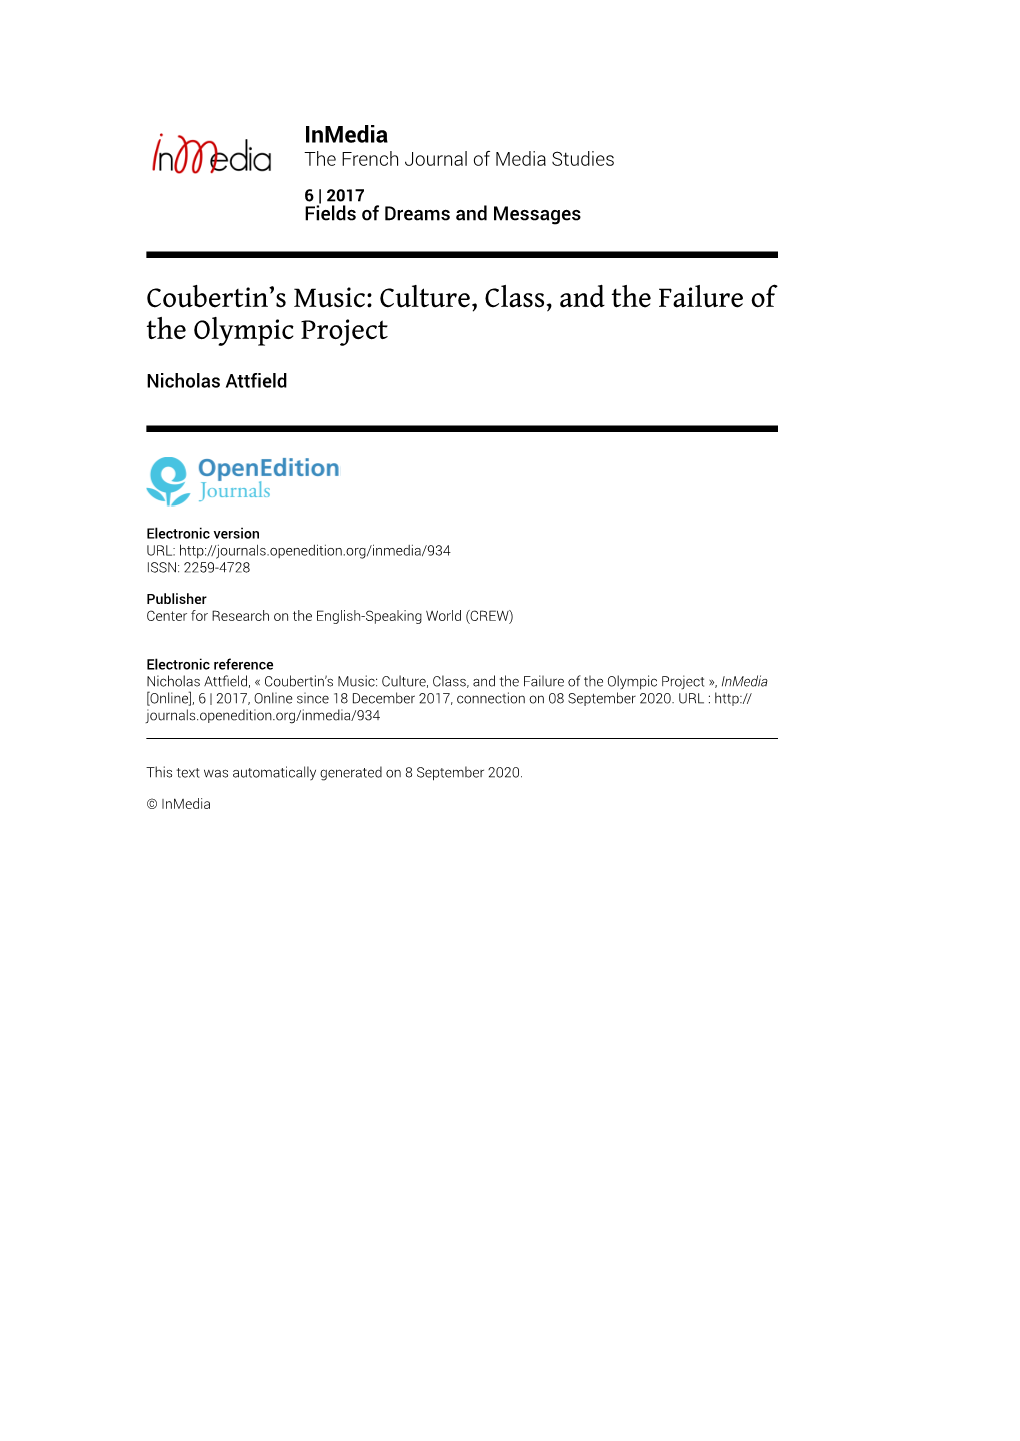 Inmedia, 6 | 2017 Coubertin’S Music: Culture, Class, and the Failure of the Olympic Project 2